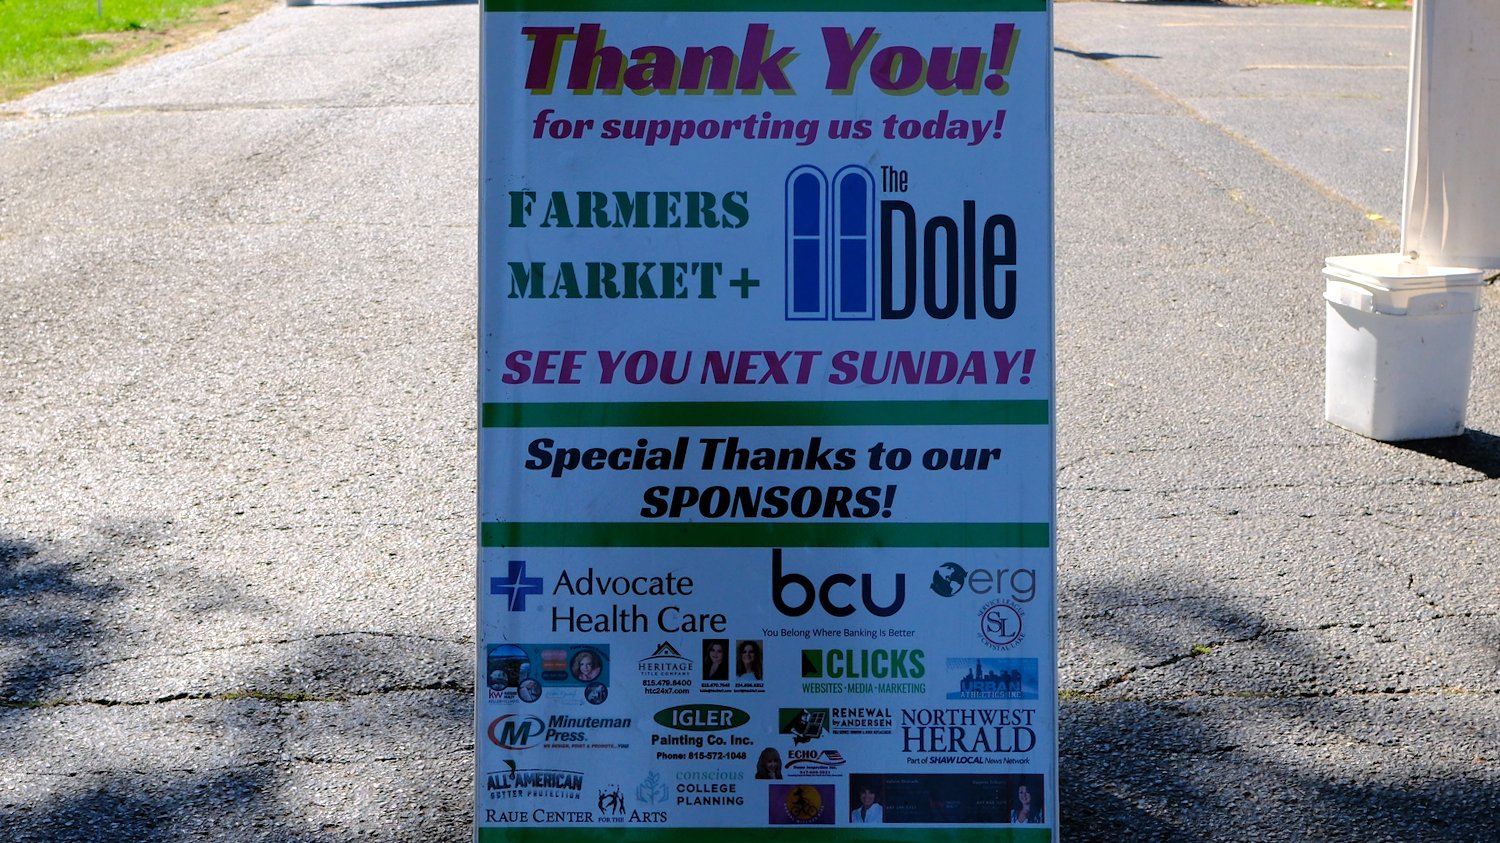 Sponsors plaque at the Farmers Market+ at The Dole.